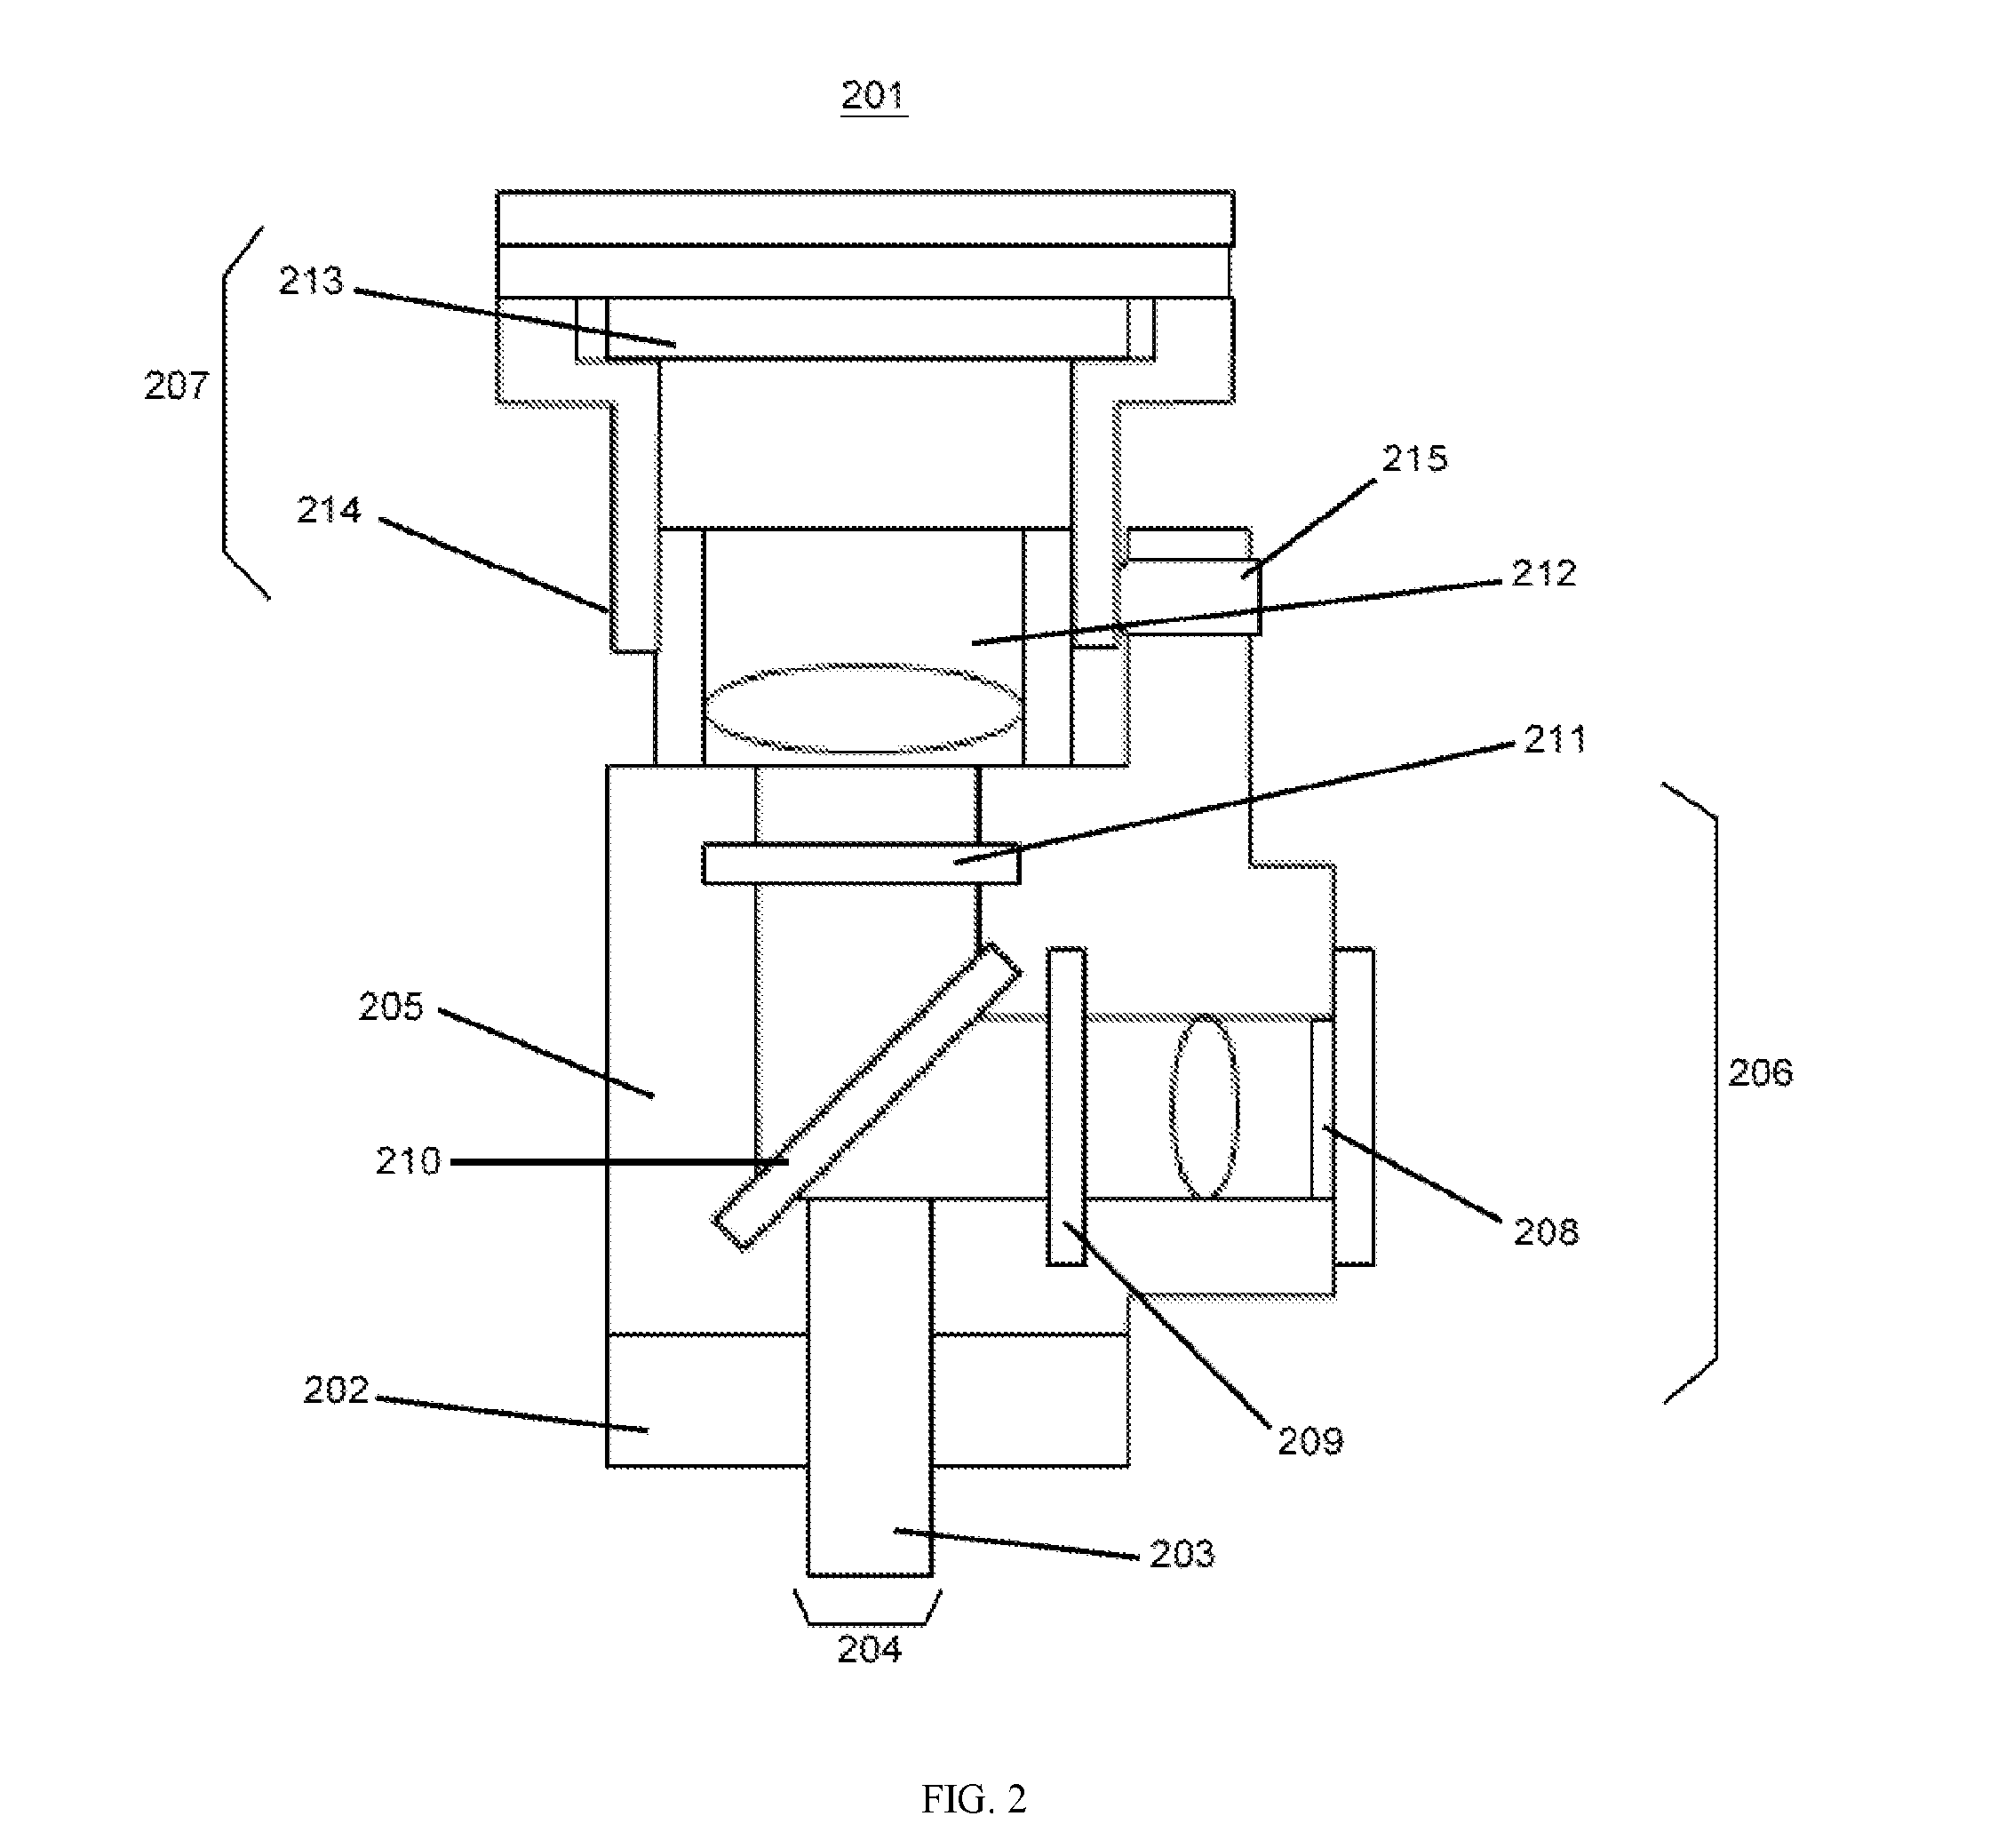 Miniaturized imaging devices, systems and methods